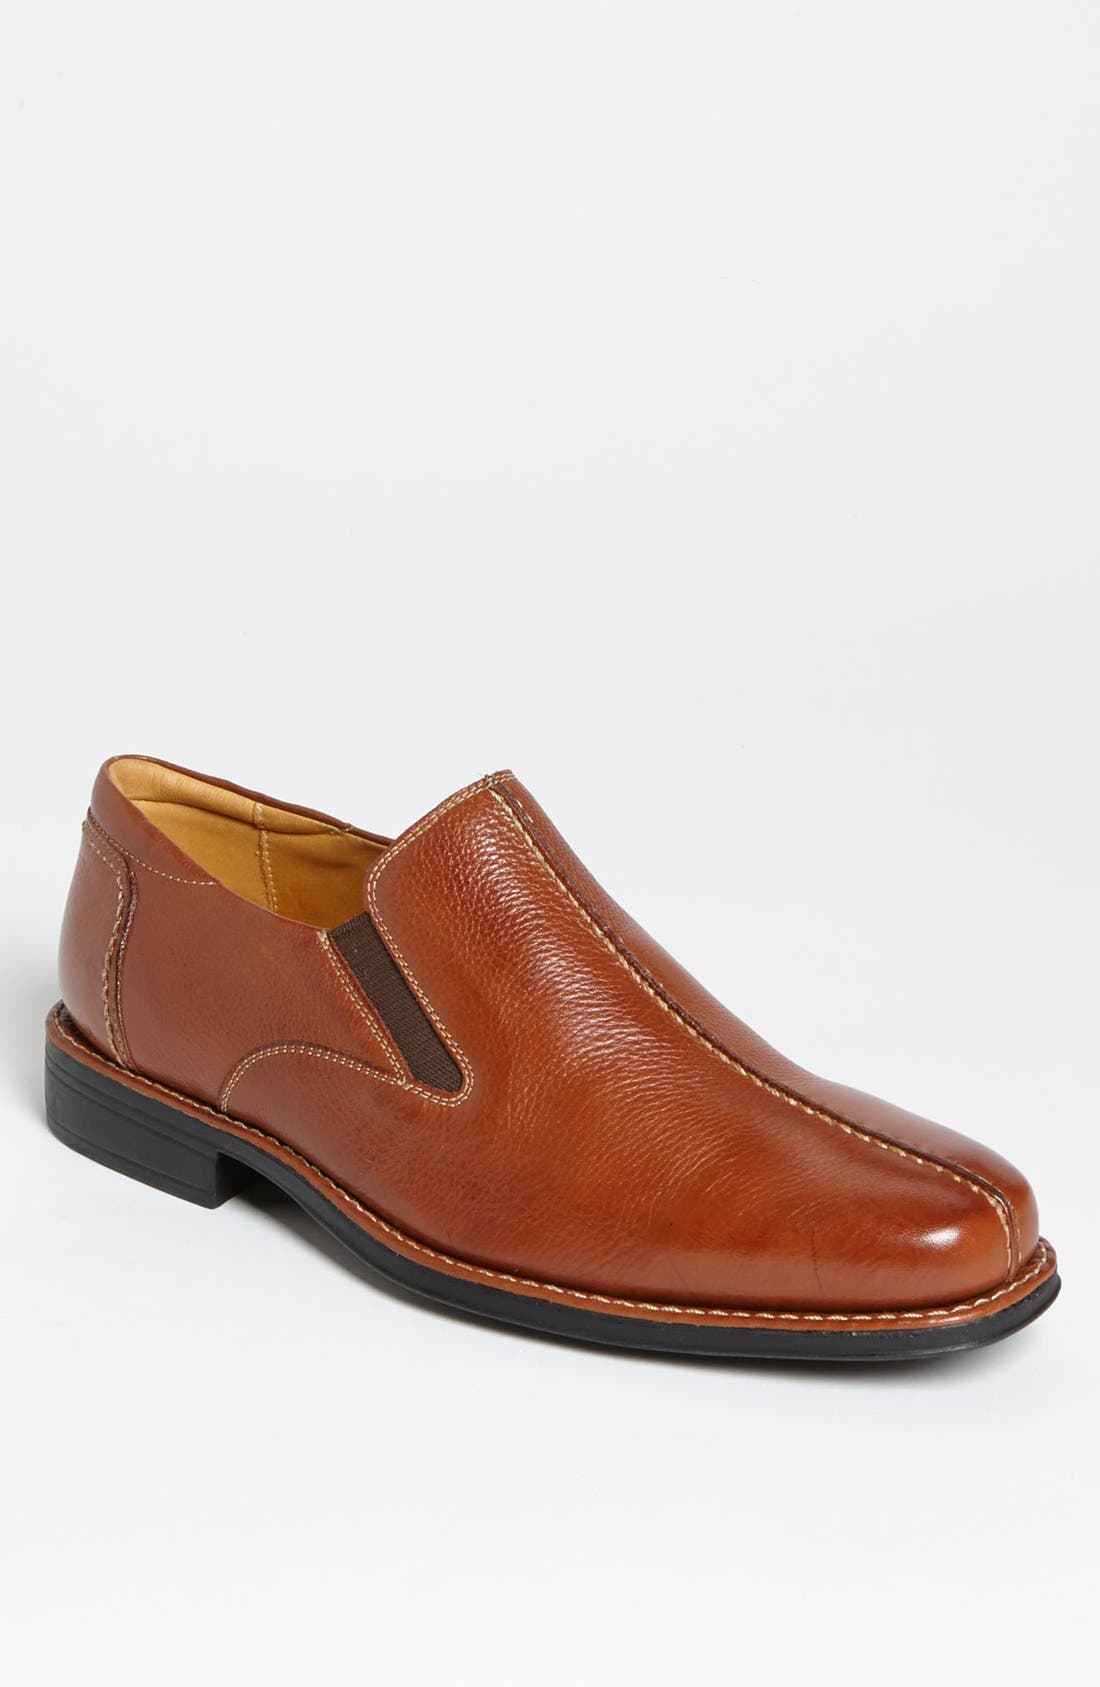 Sandro Moscoloni Tampa Loafer In Medium Brown